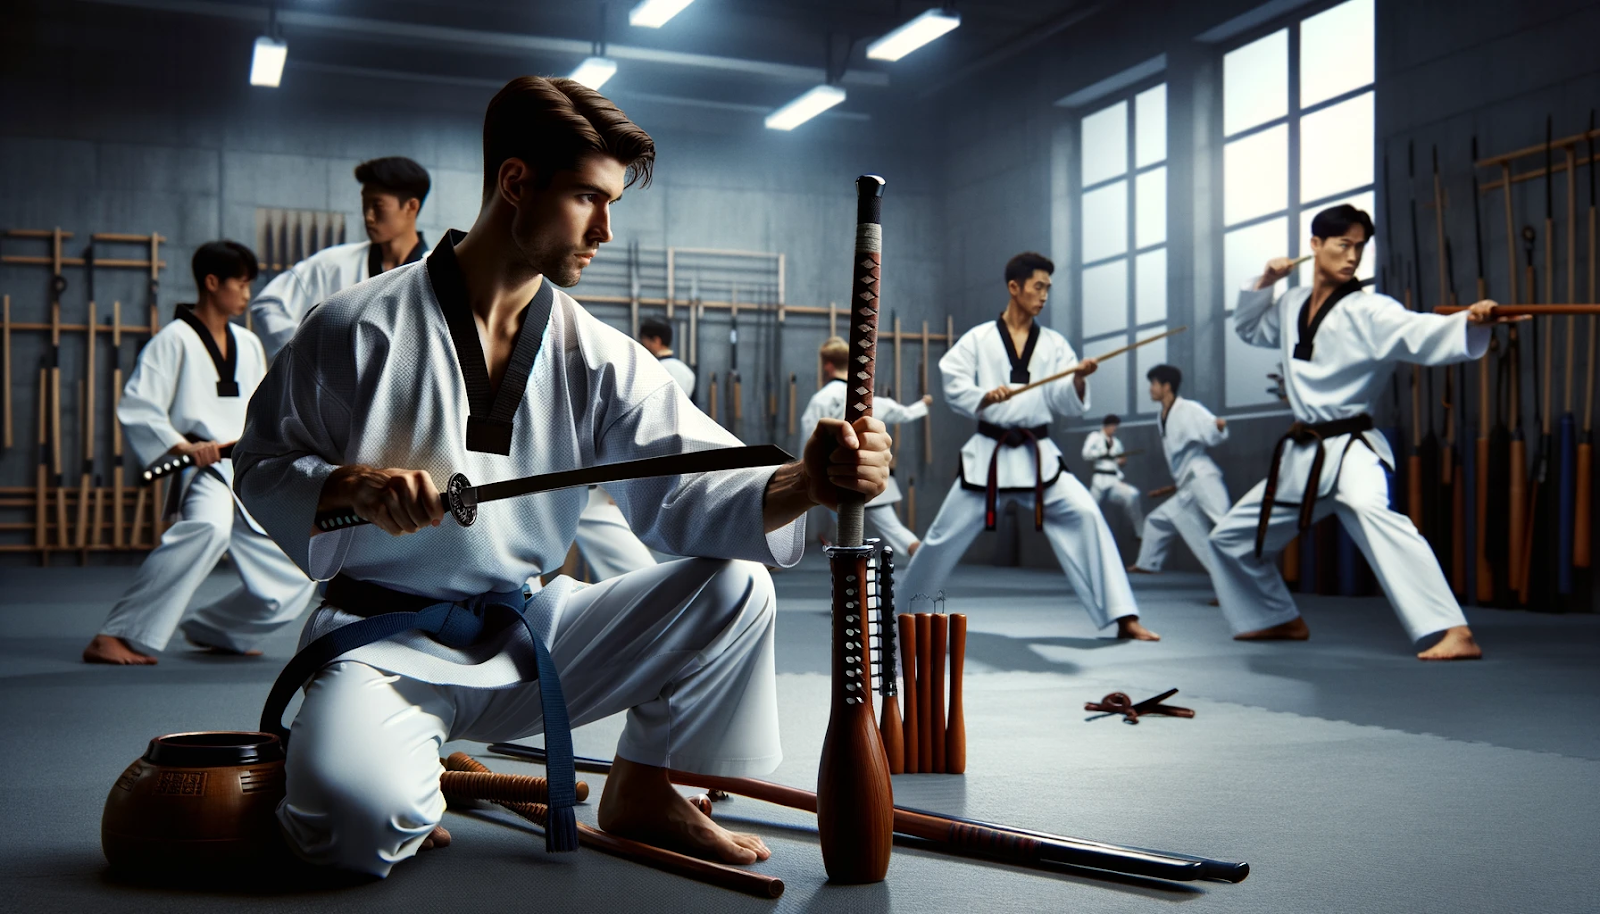 The scene features a Taekwondo practitioner in a dobok skillfully handling traditional weapons such as a bo staff, nunchaku, and Korean sword in a dojo. Other students practicing with various weapons can be seen in the background, creating a focused and intense atmosphere.